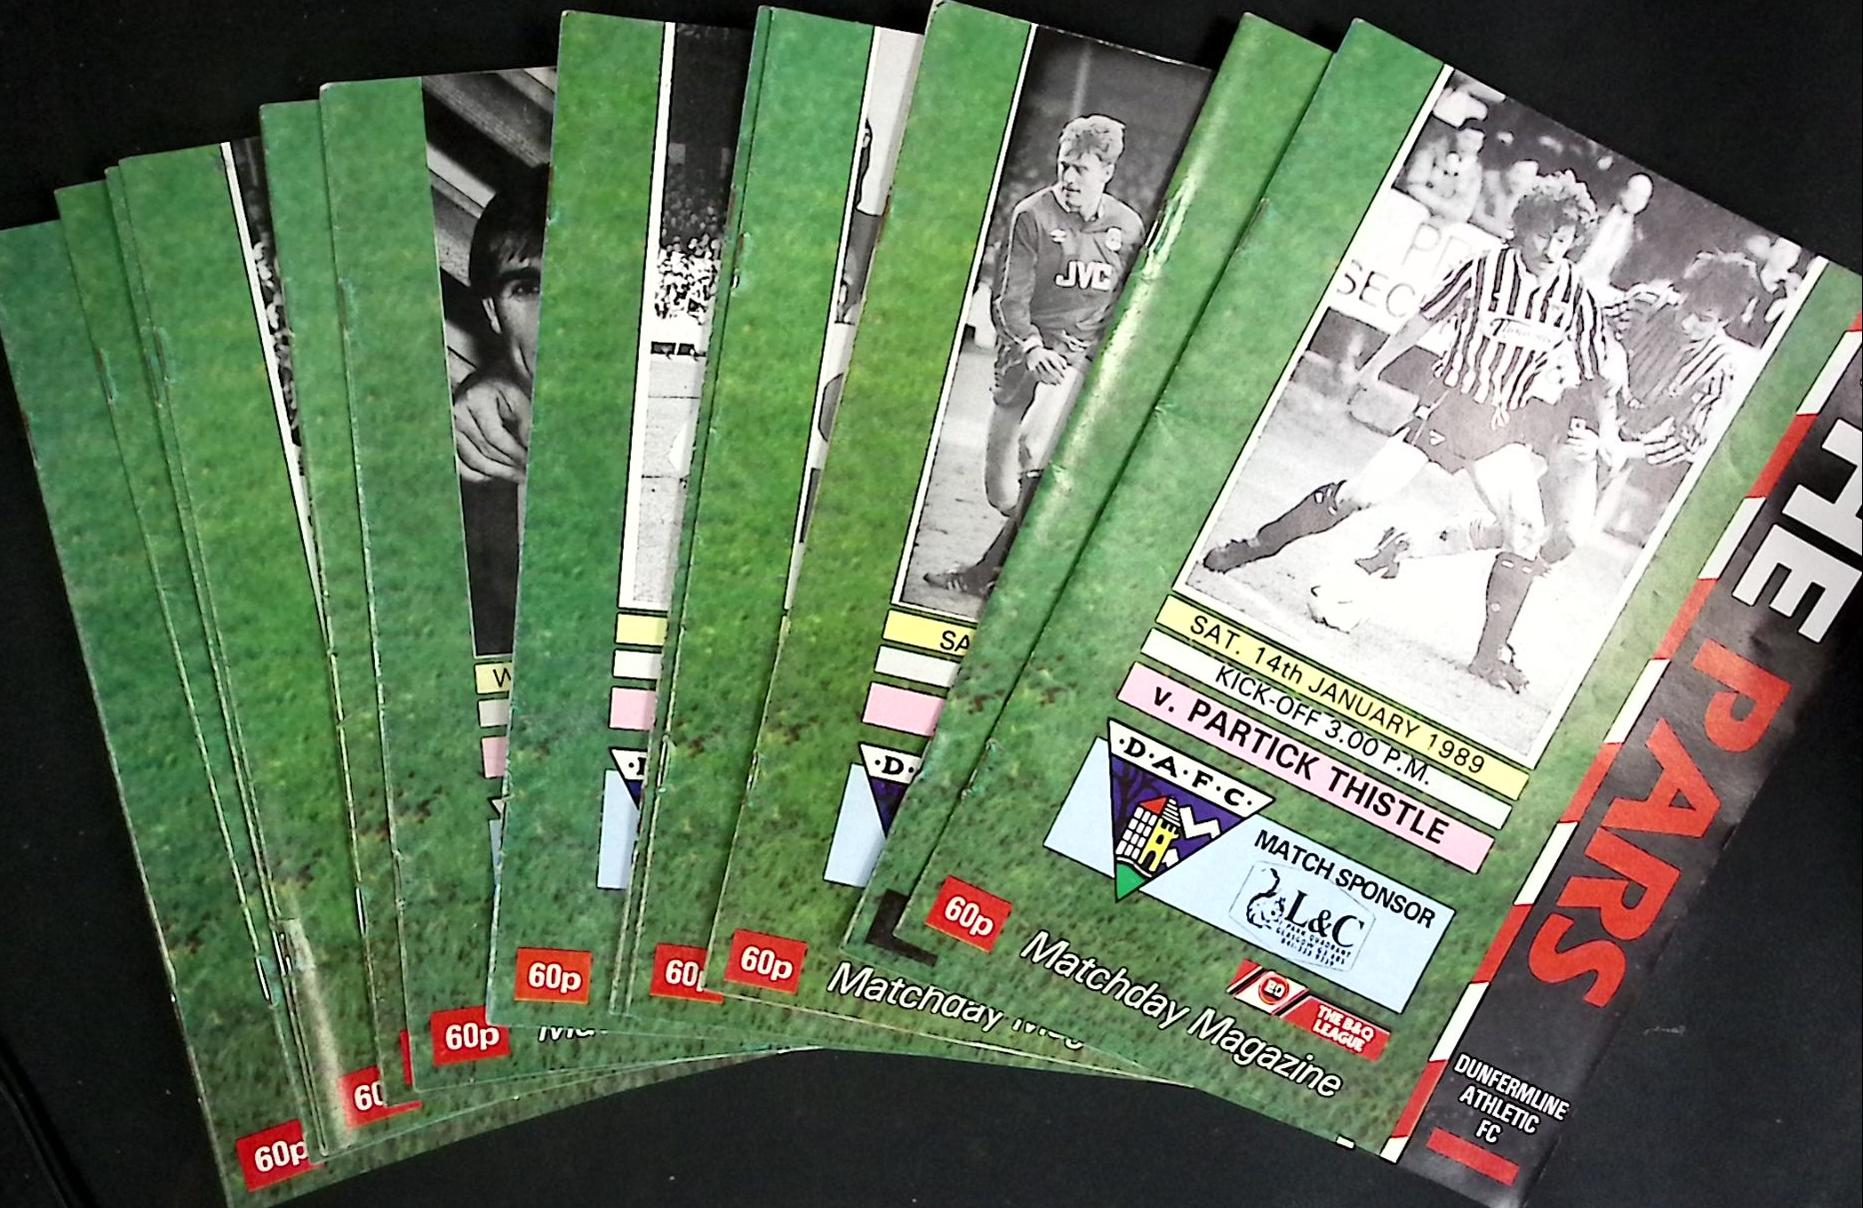 Dunfermline Athletic Football Programmes. The Pars. 1988-89 Season. 14 issues.